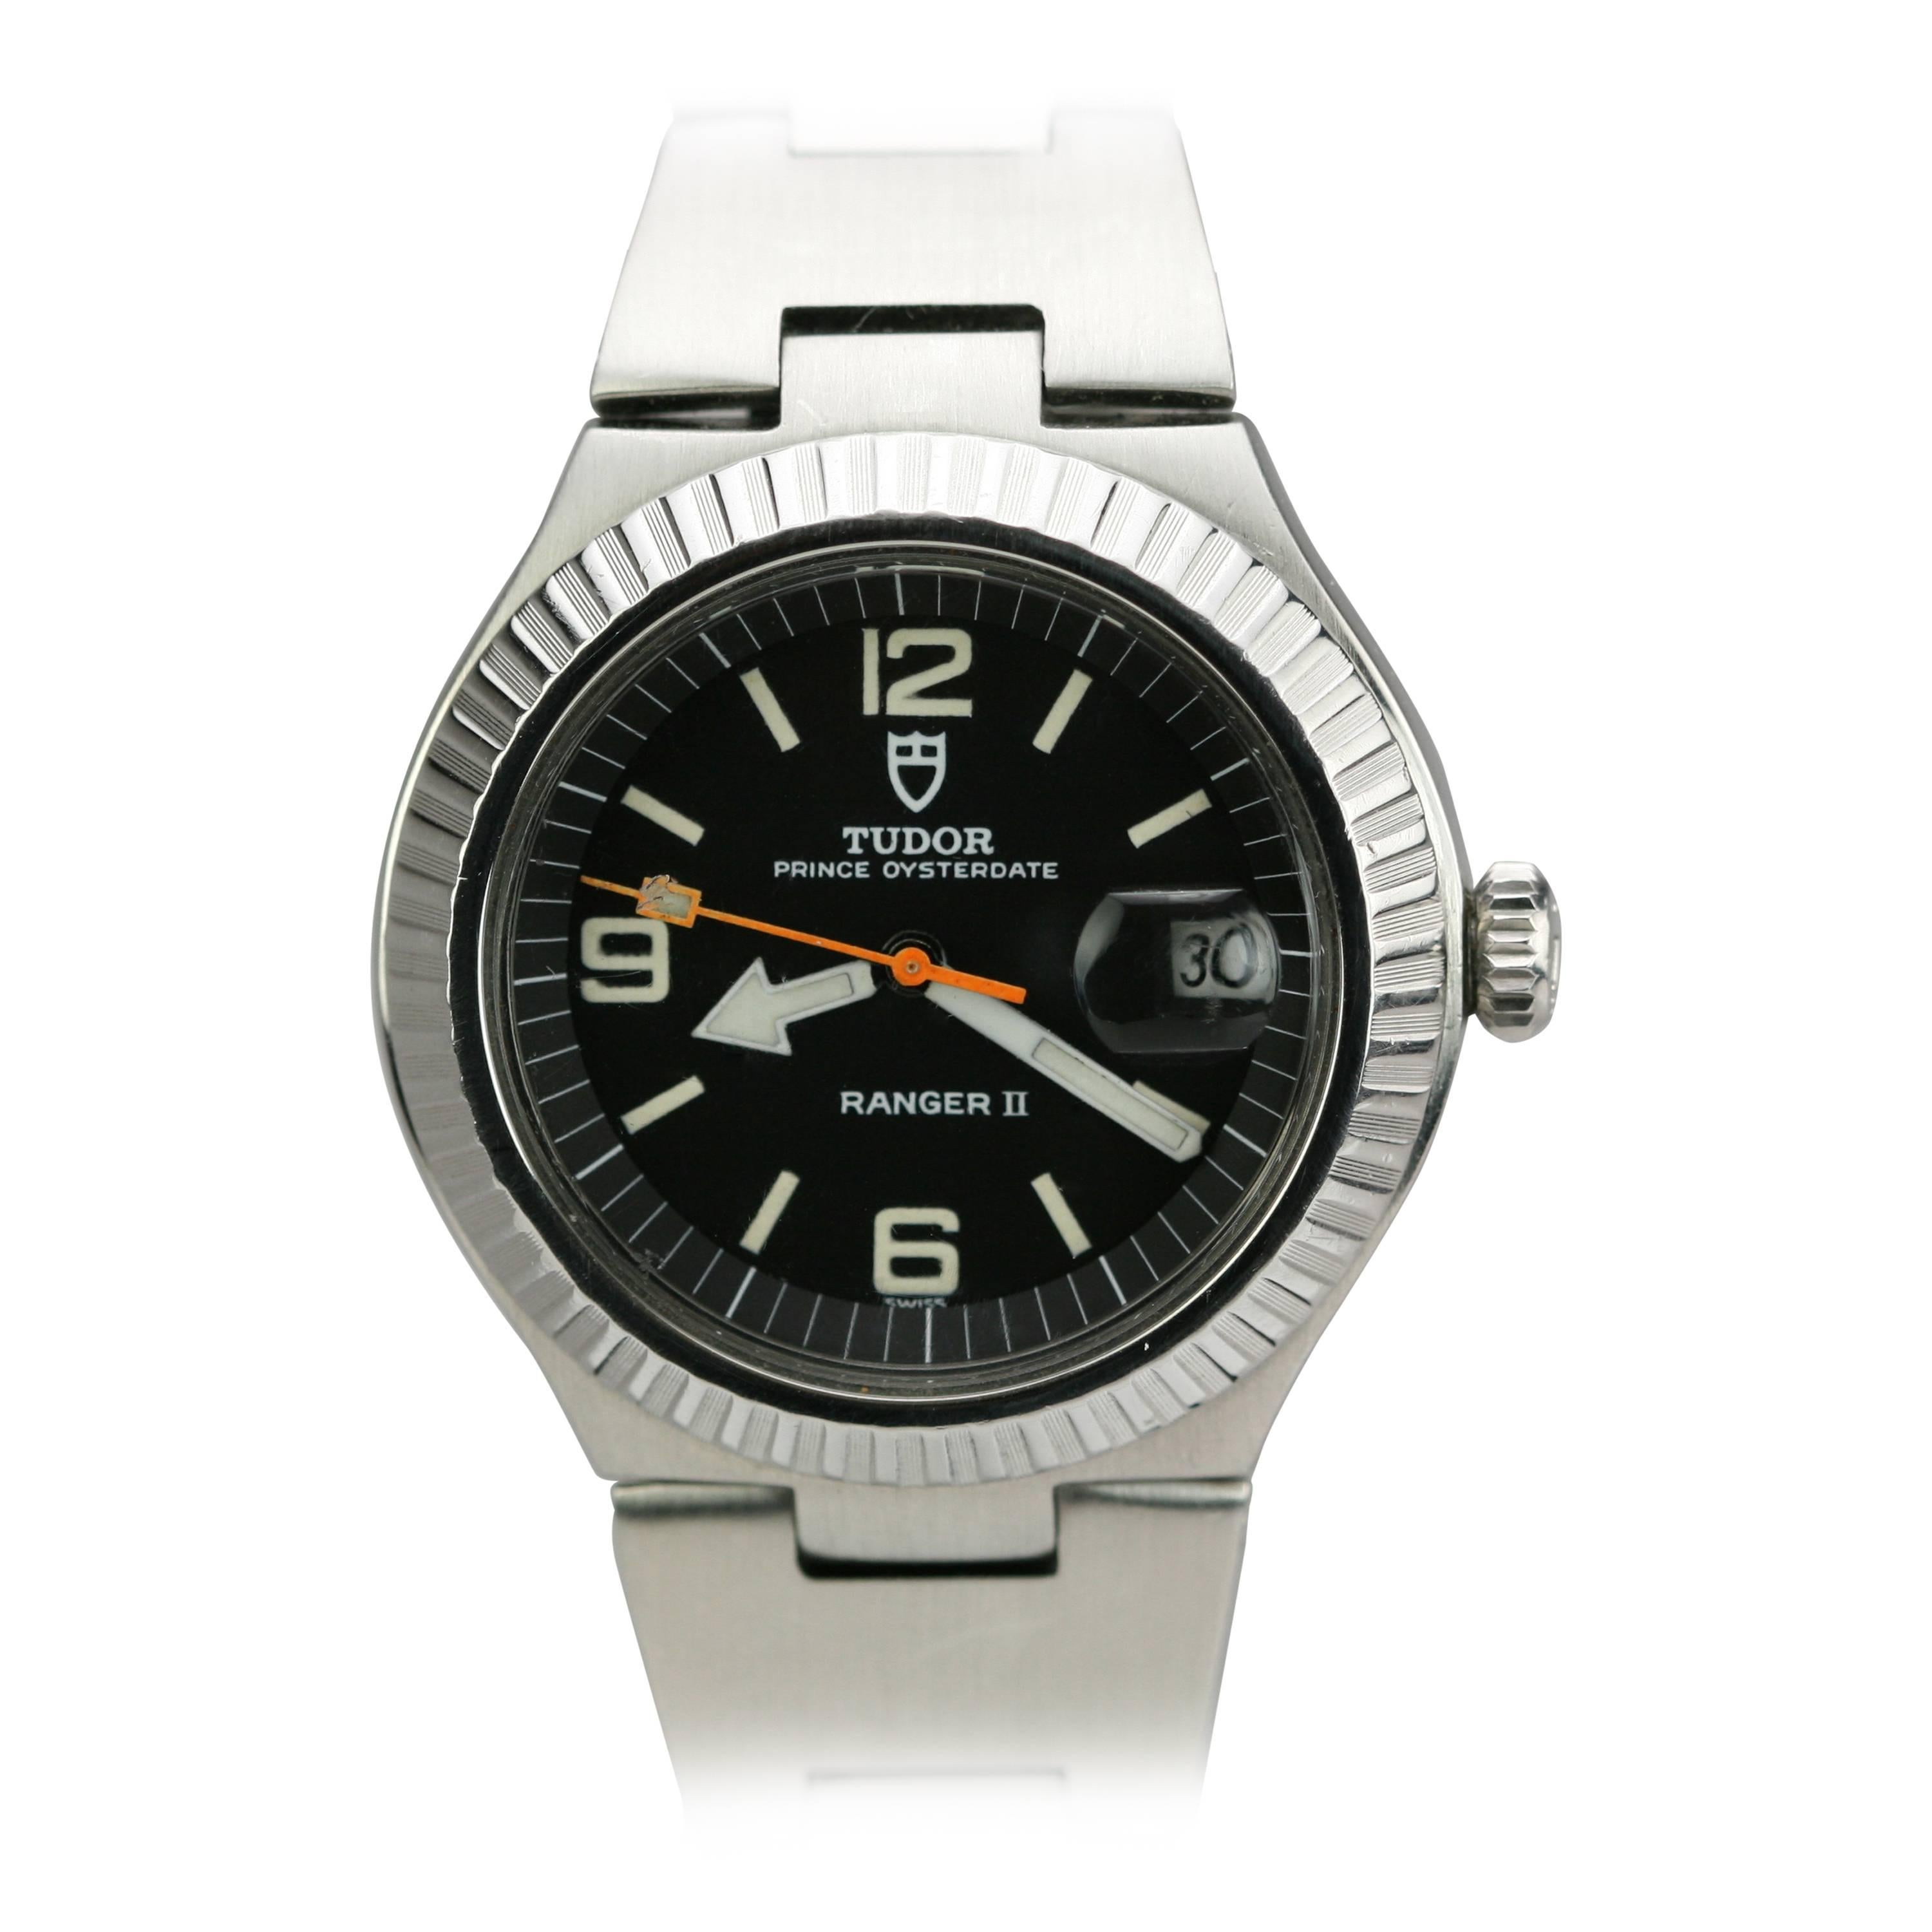 Tudor Stainless Steel Prince Oyster Date Ranger II Wristwatch